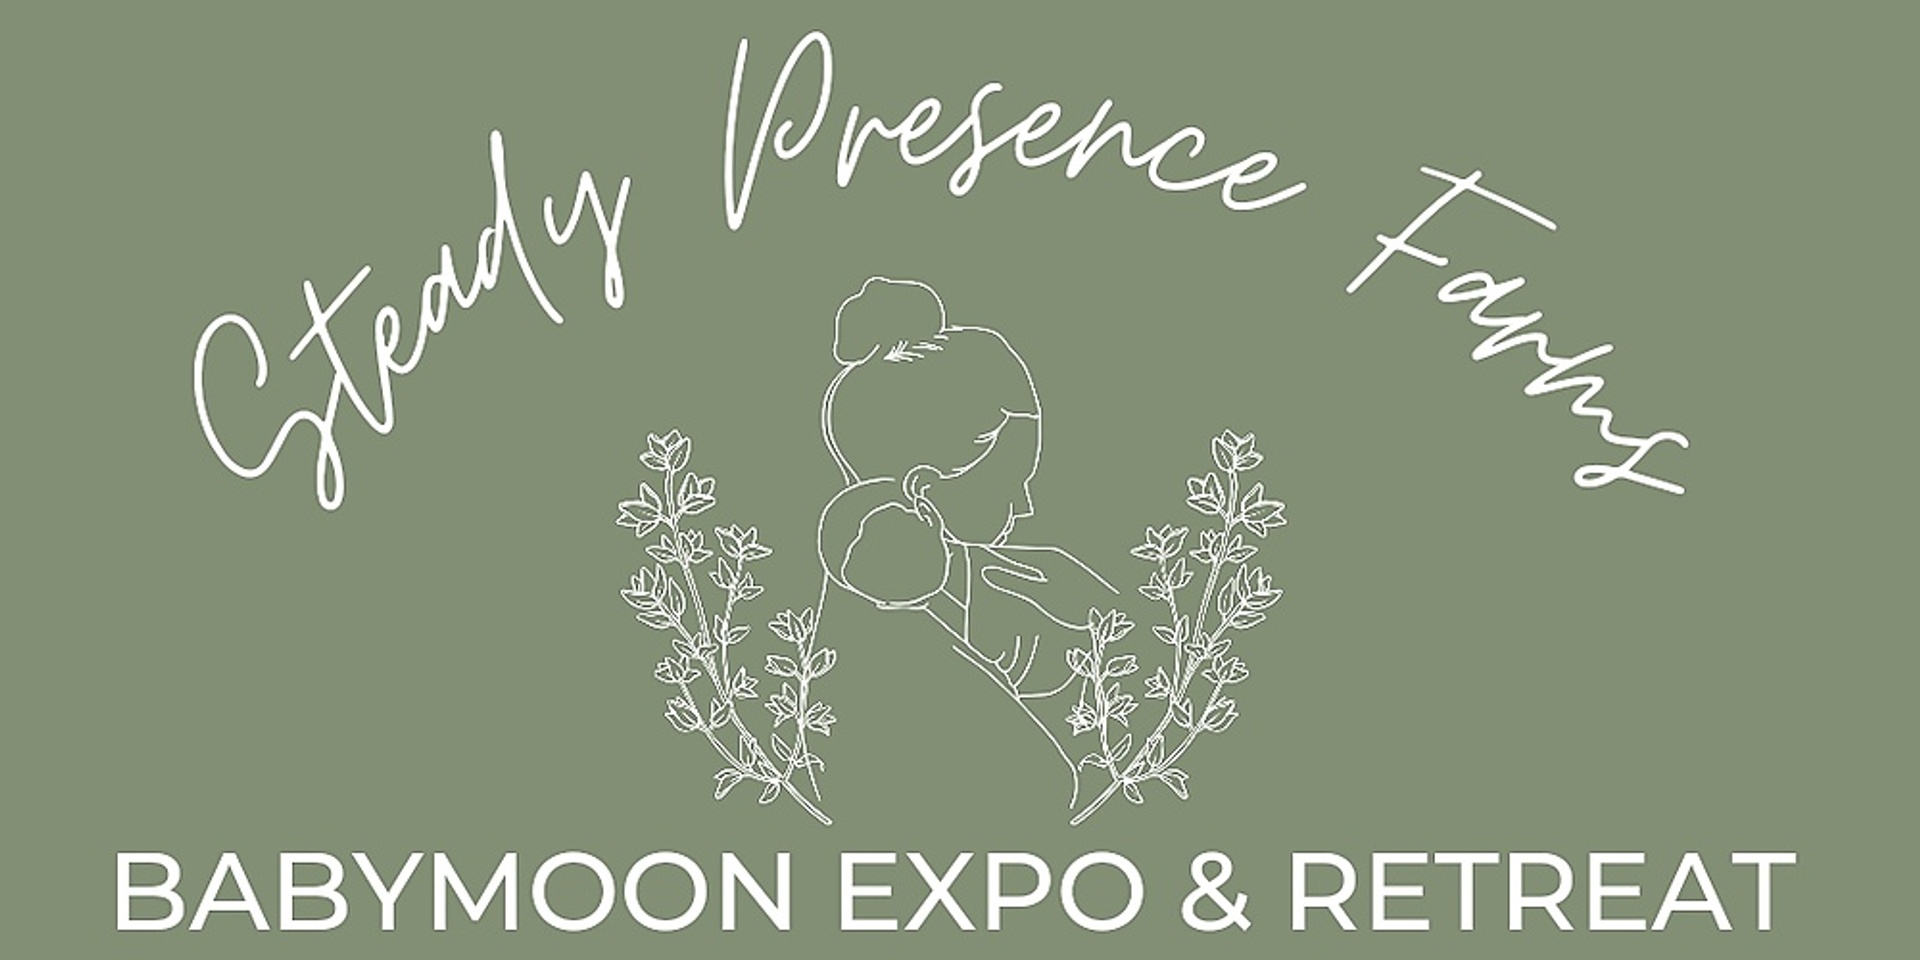 Fall Babymoon Expo & Retreat: An Event for Expecting Parents